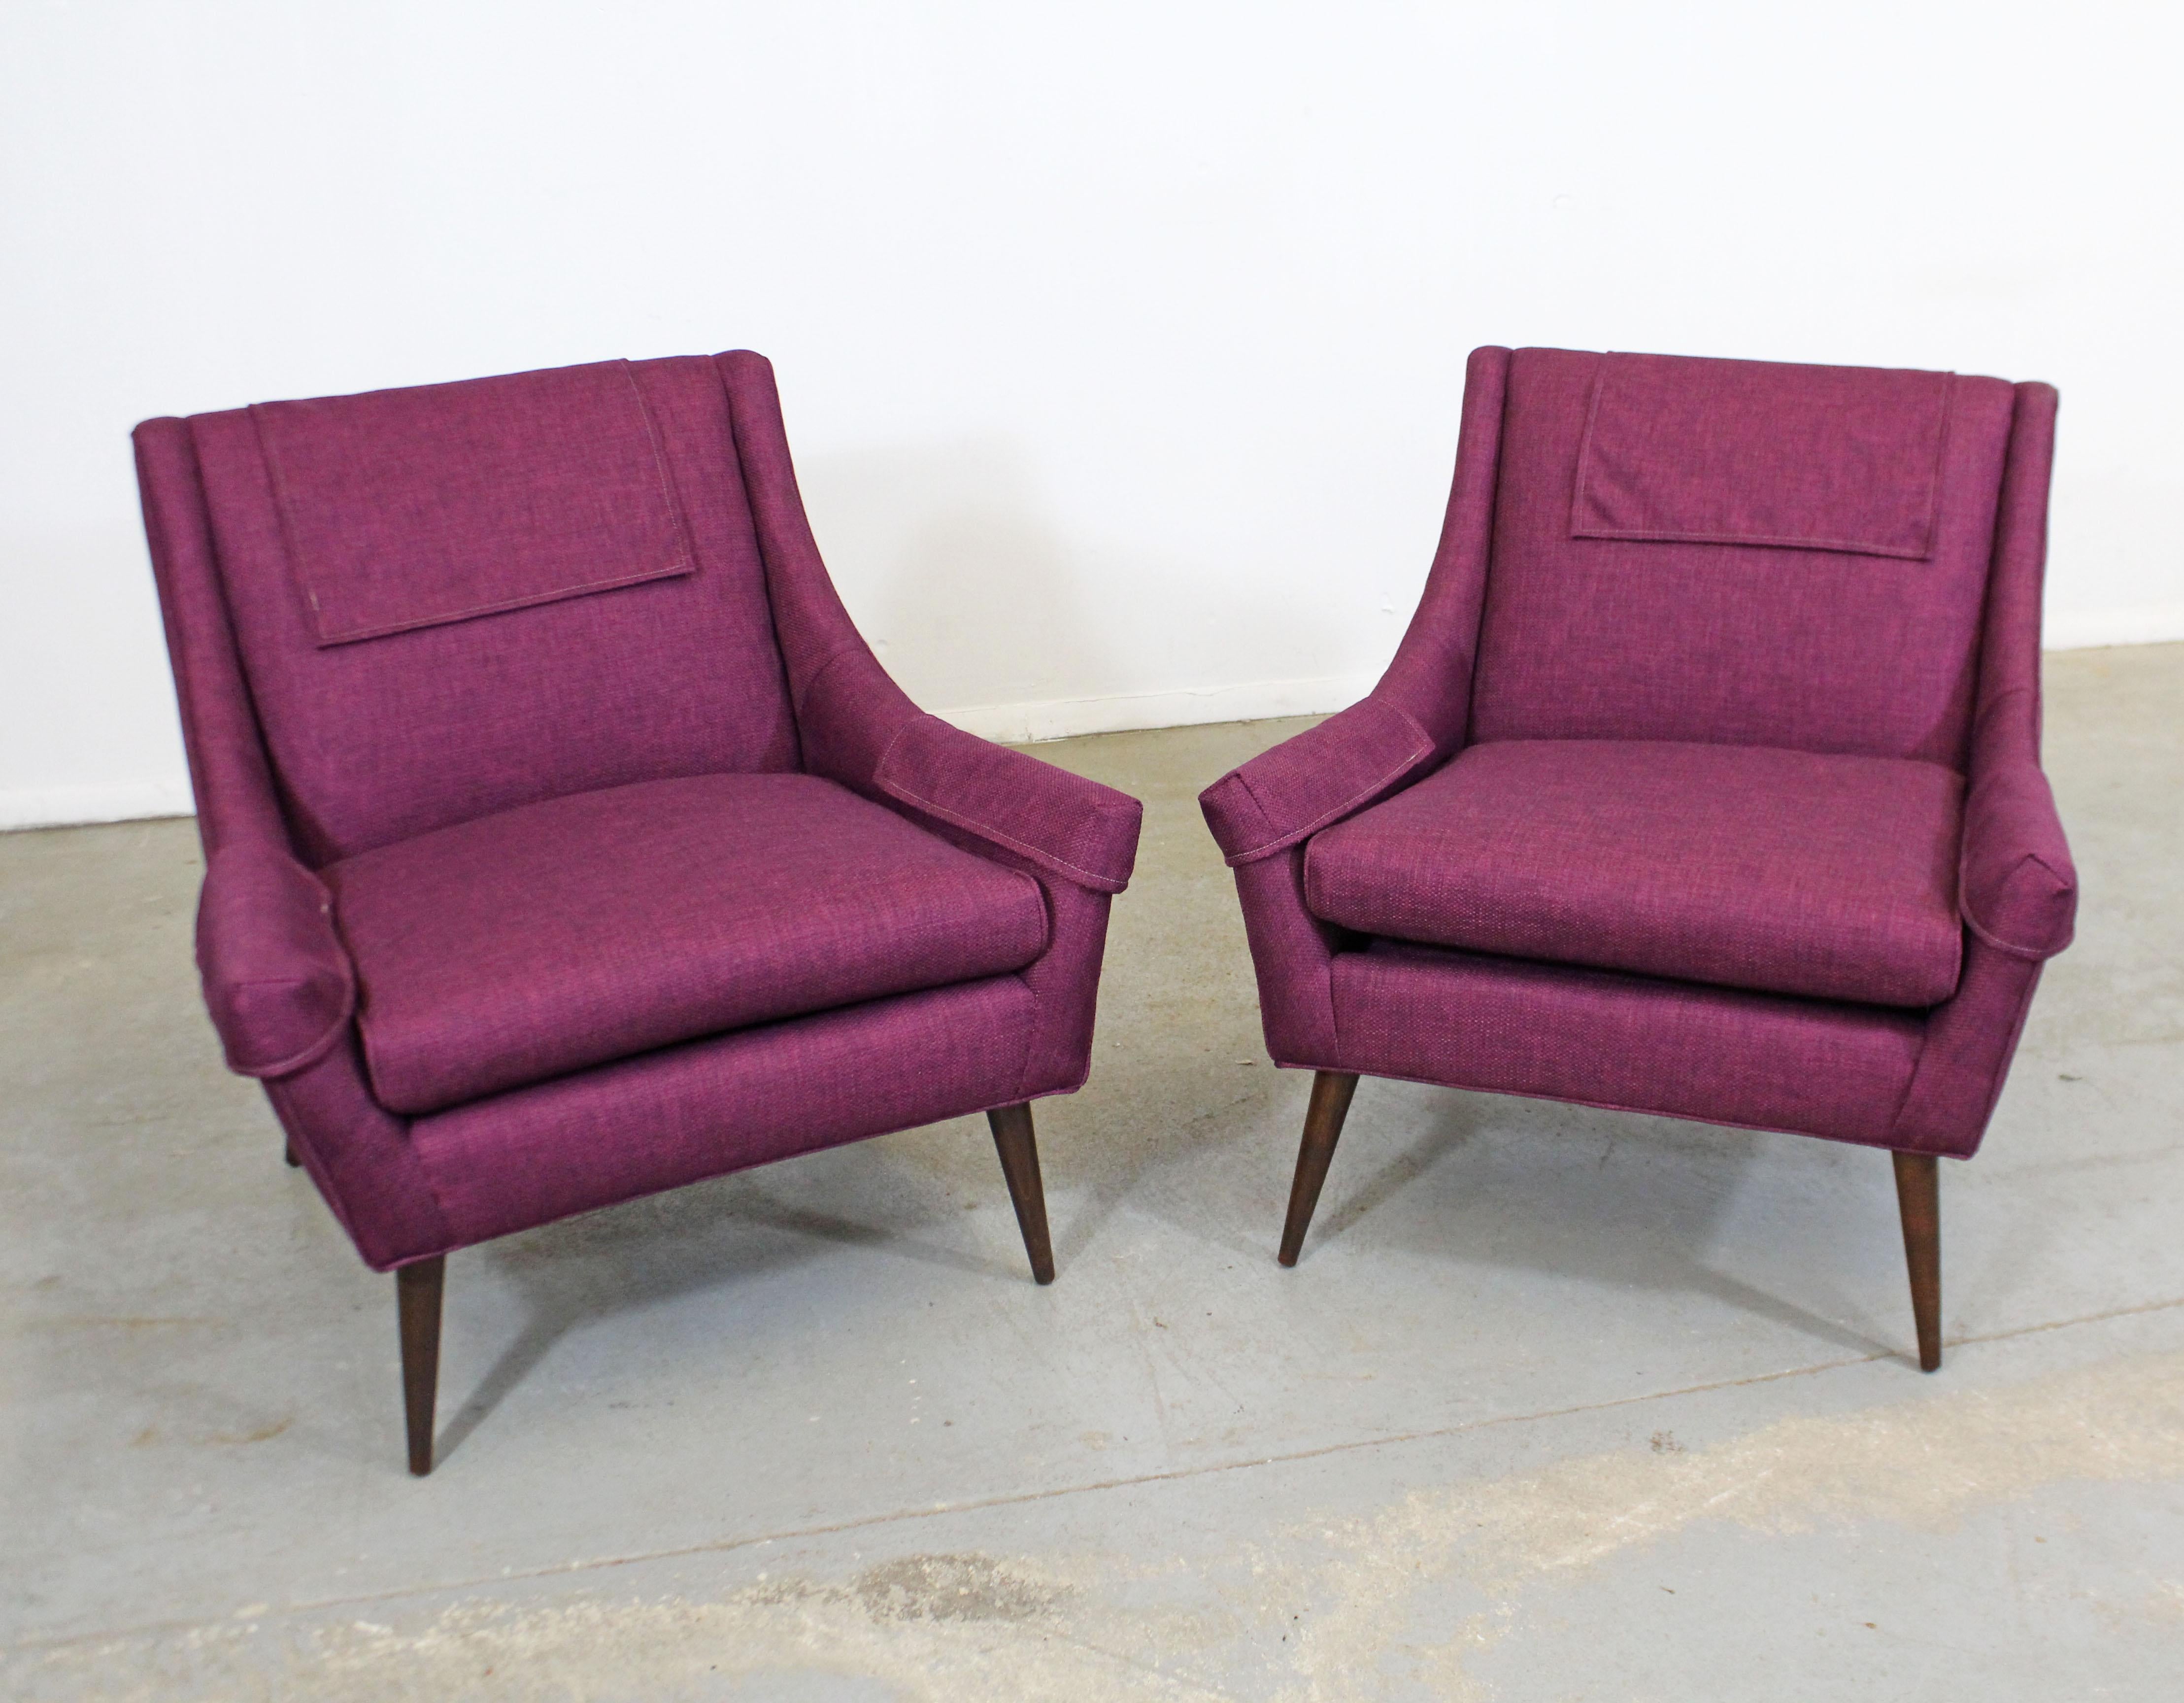 Unknown Pair of Mid-Century Modern Paul McCobb Style Lounge Chairs